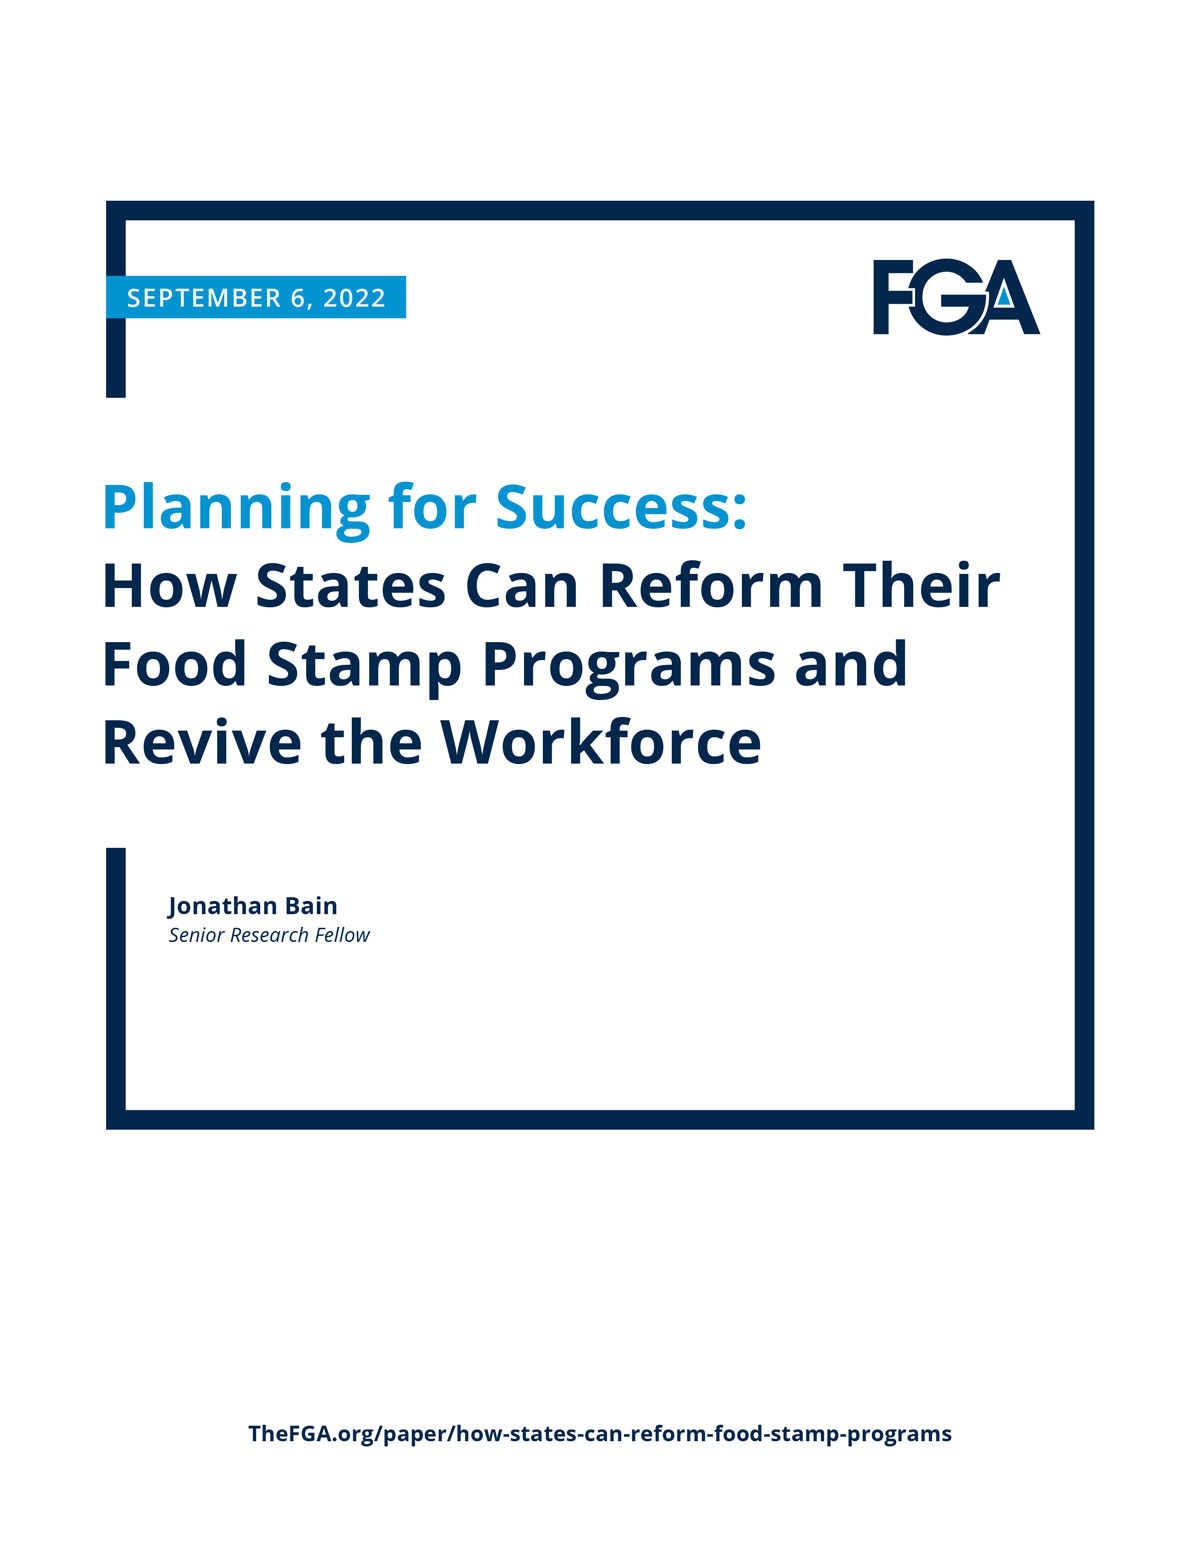 Planning for Success: How States Can Reform Their Food Stamp Programs and Revive the Workforce